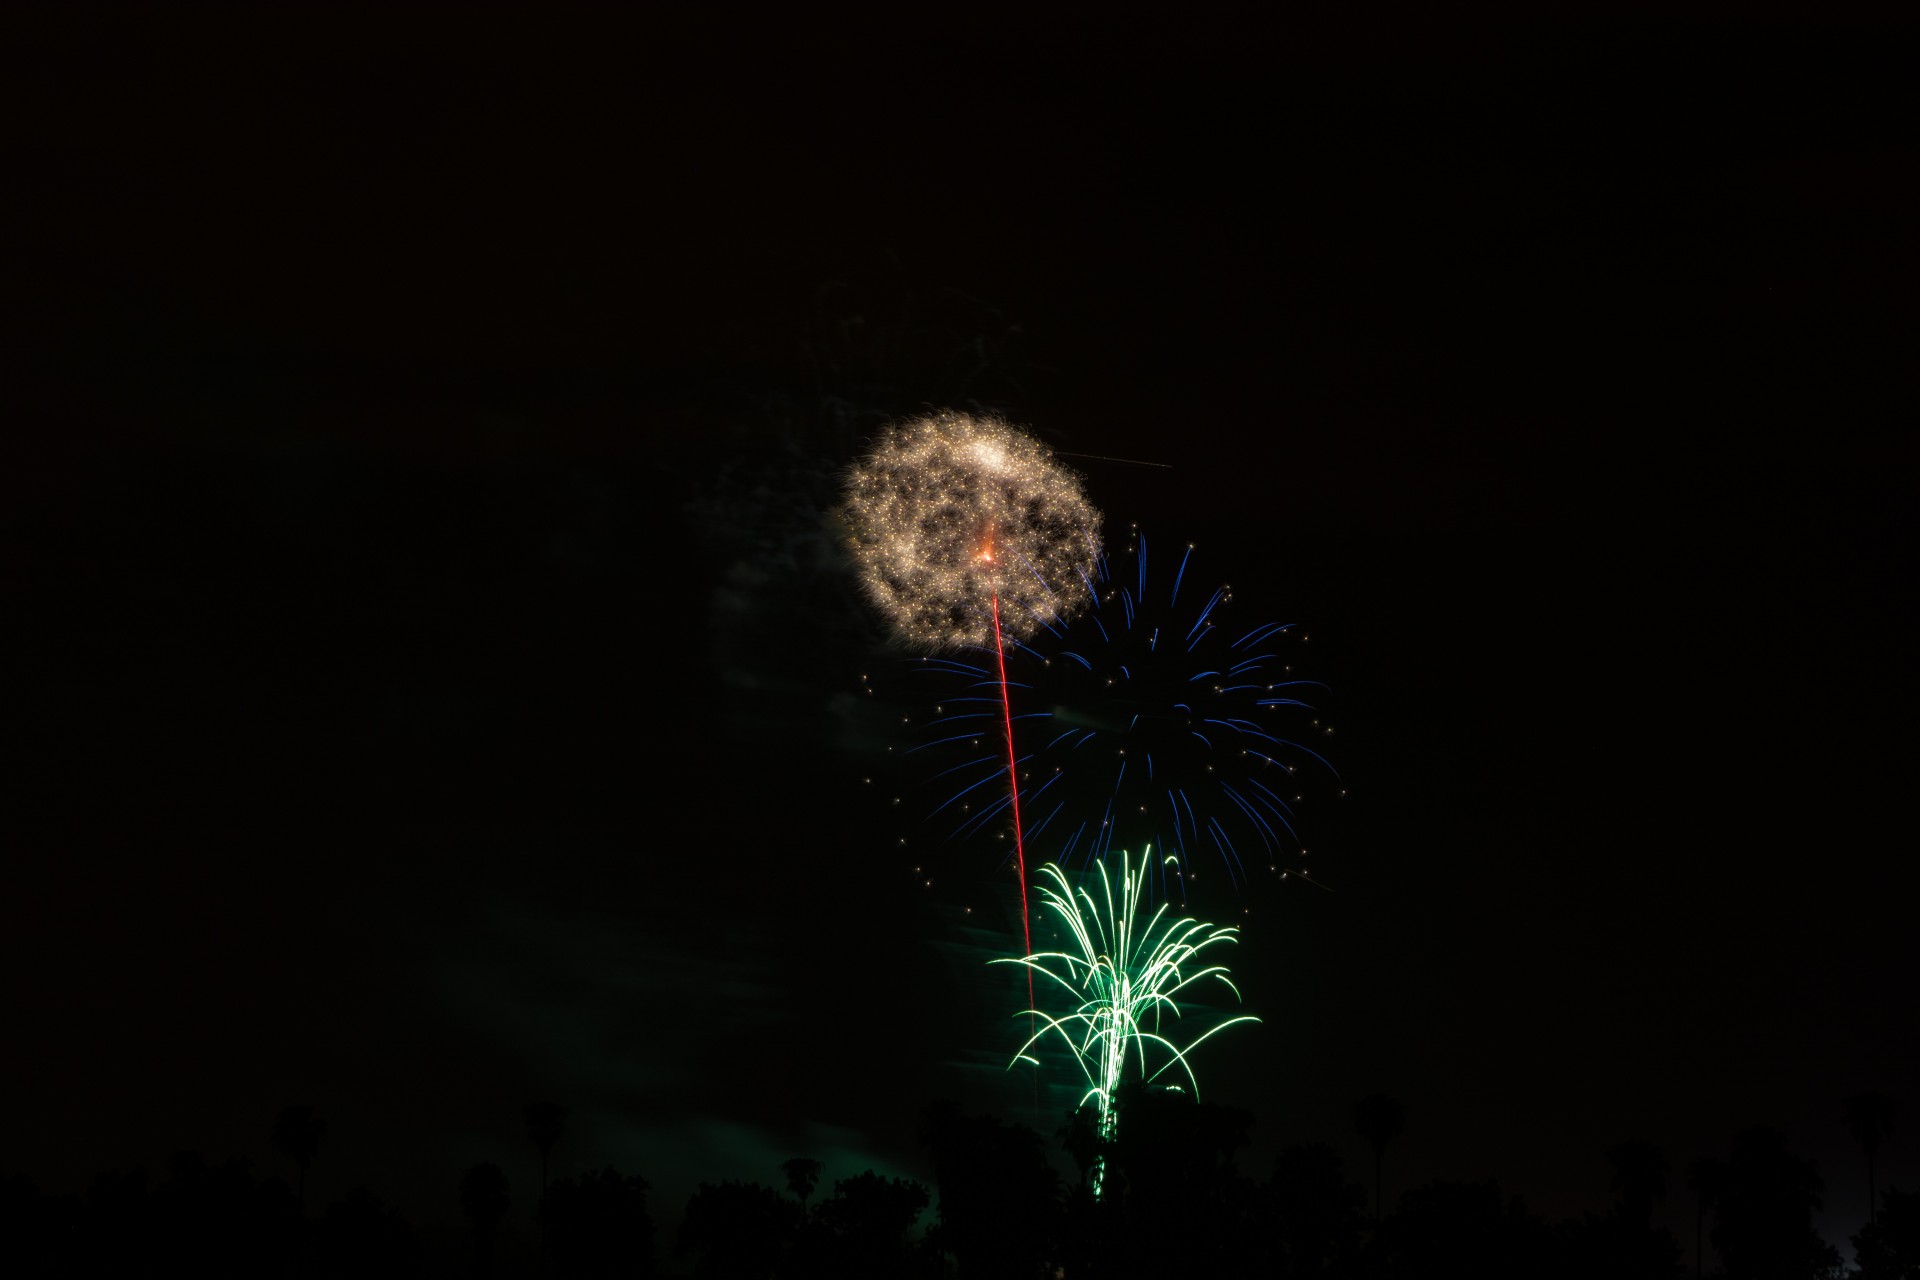 fireworks color july free photo